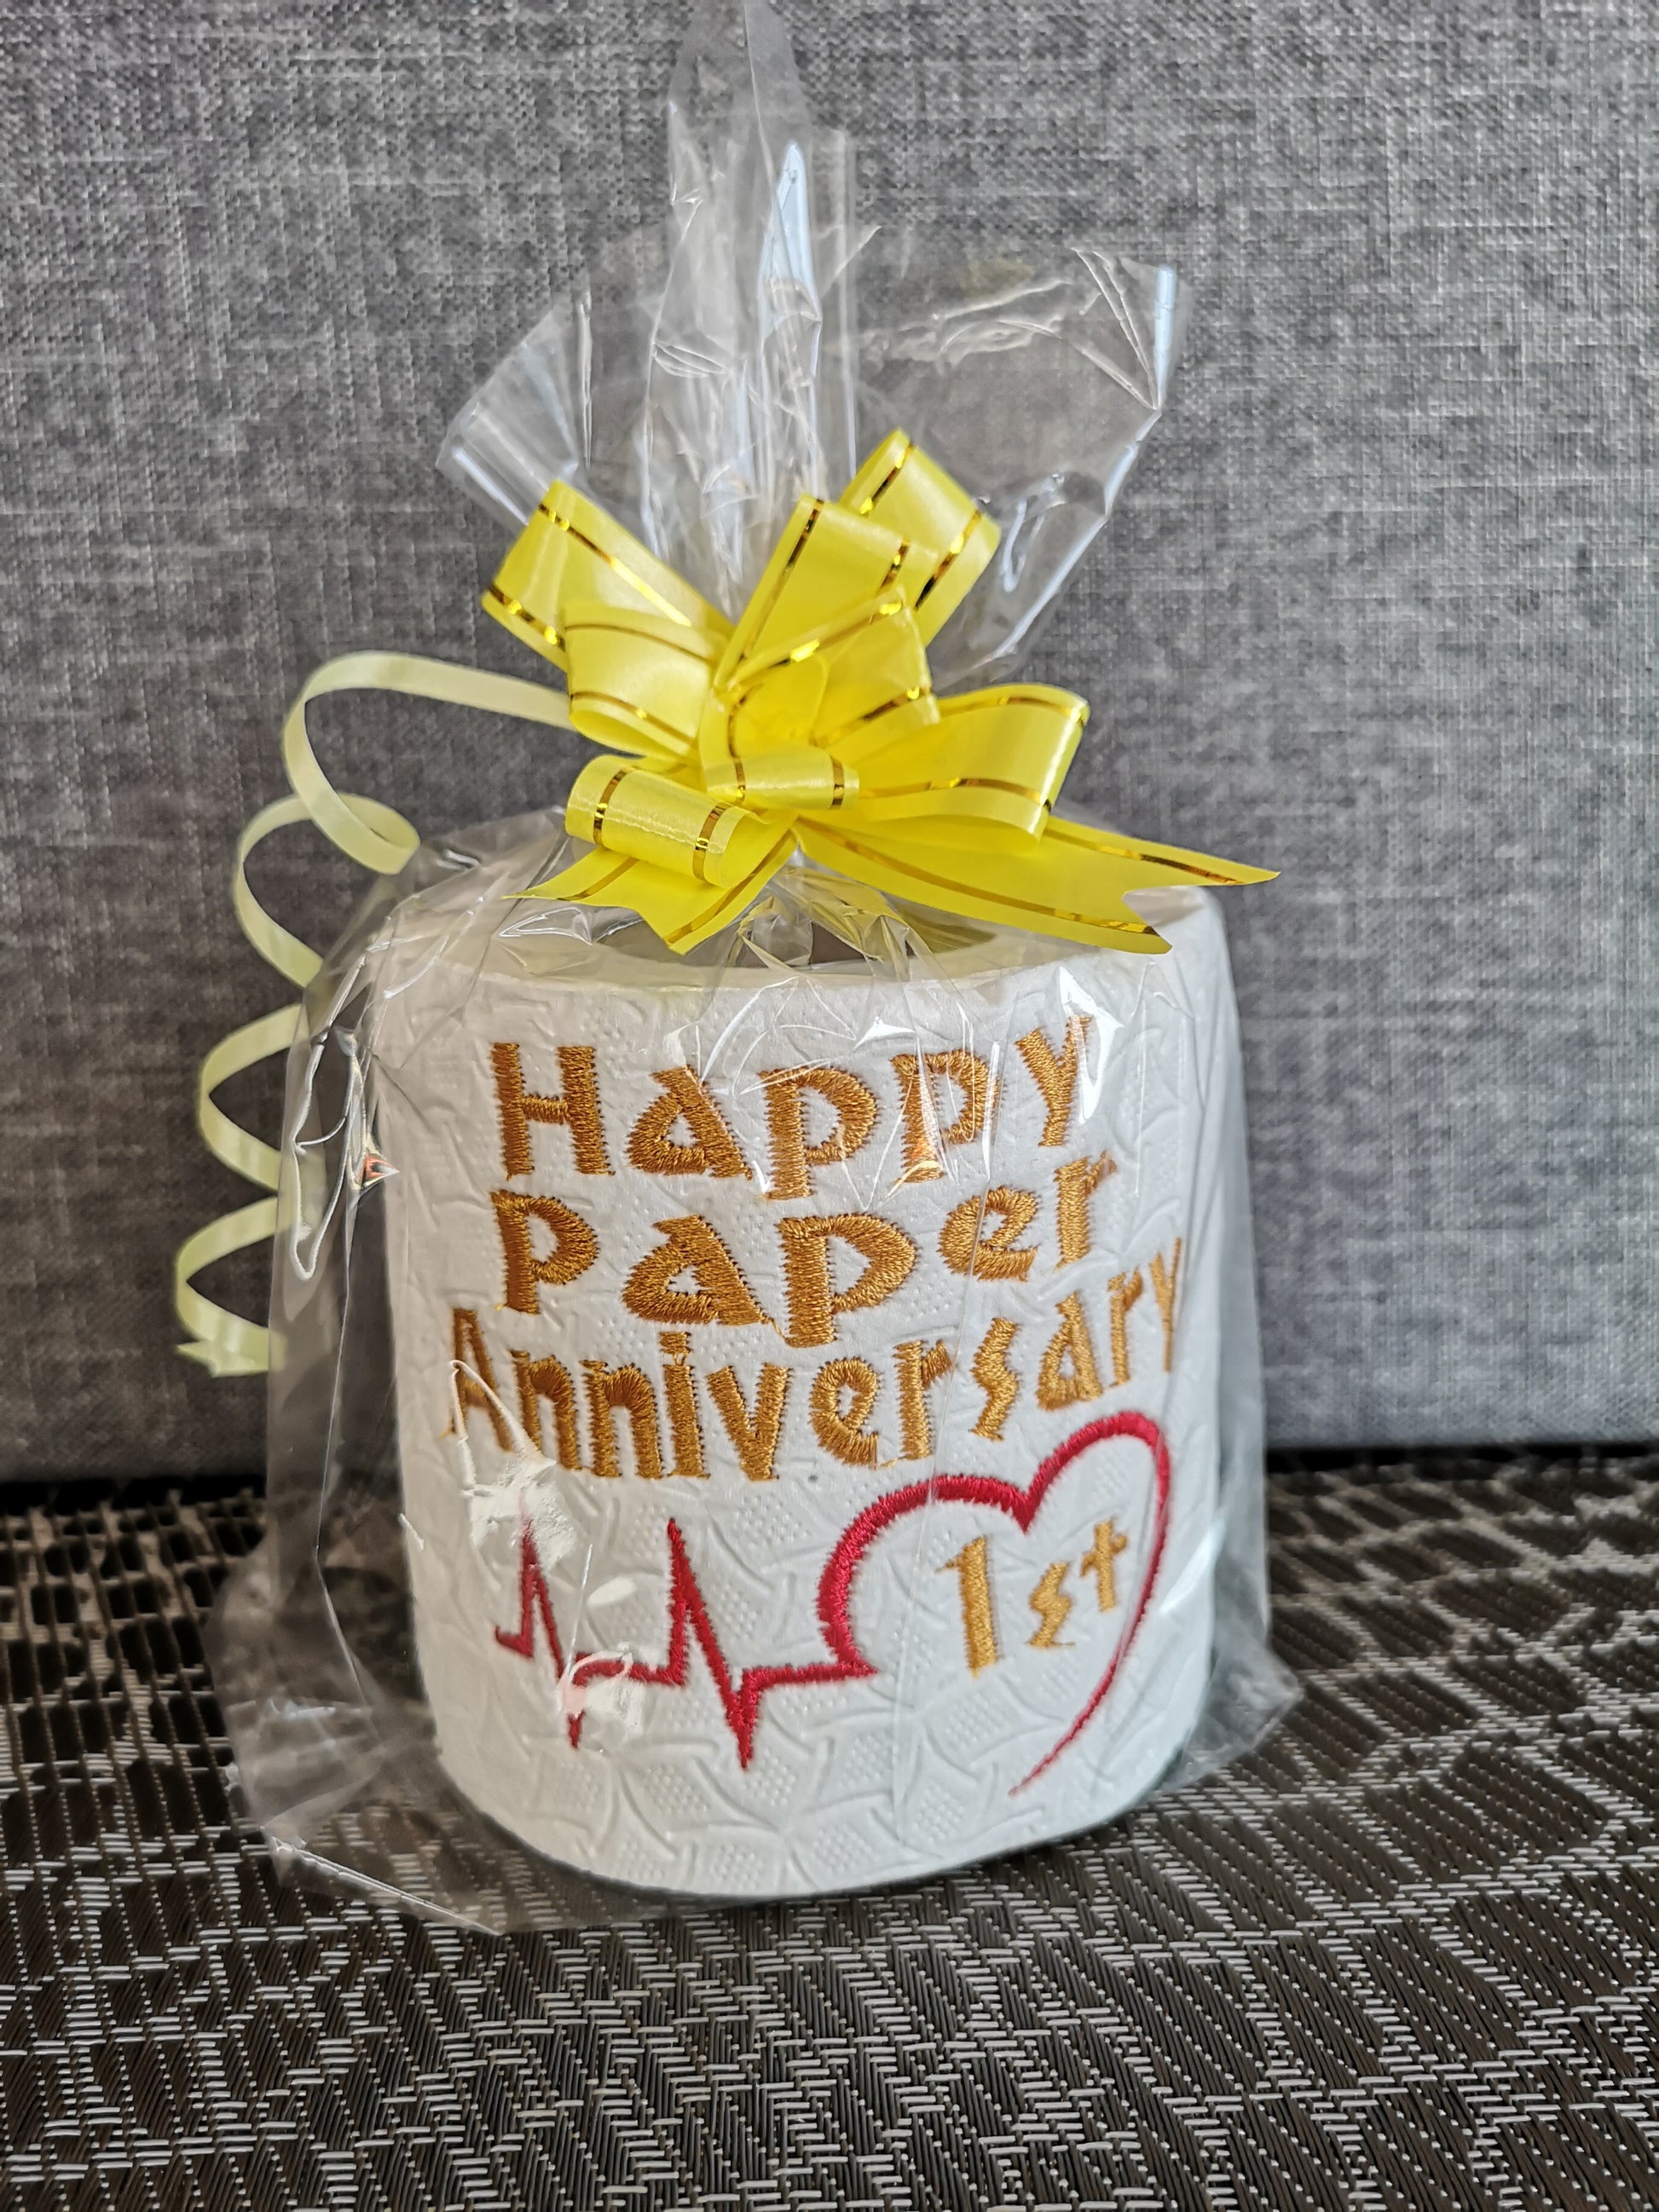 Anniversary 1st Anniversary - paper themed gift box idea for husband  Toilet…  Paper wedding anniversary gift, Paper gifts anniversary, 1 year anniversary  gifts